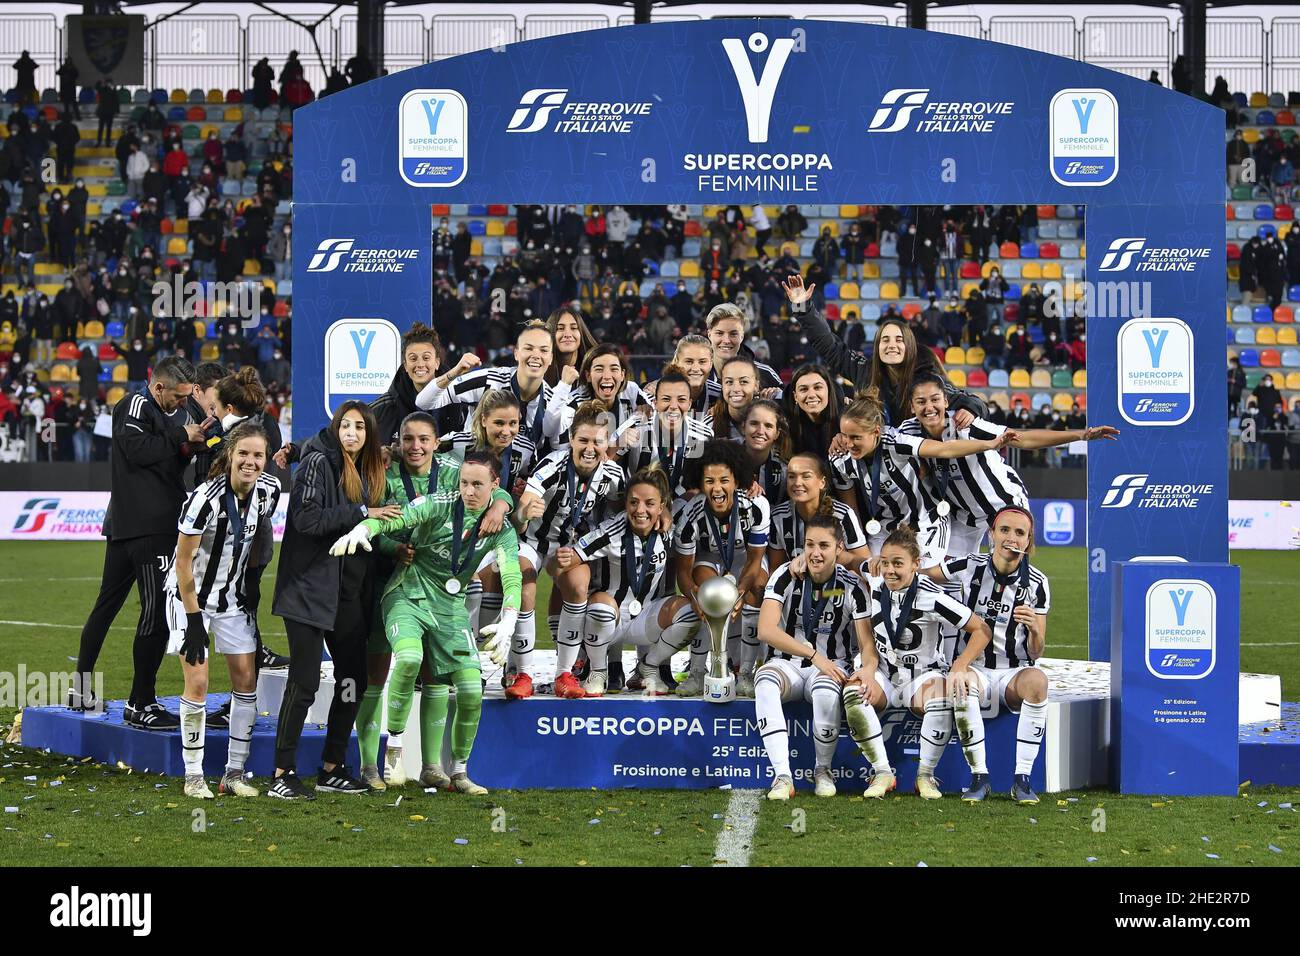 Juventus Team during the Women's Italian Supercup Final between F.C. Juventus and A.C. Milan at the Benito Stirpe Stadium on 8th of January, 2022 in Frosinone, Italy. Stock Photo